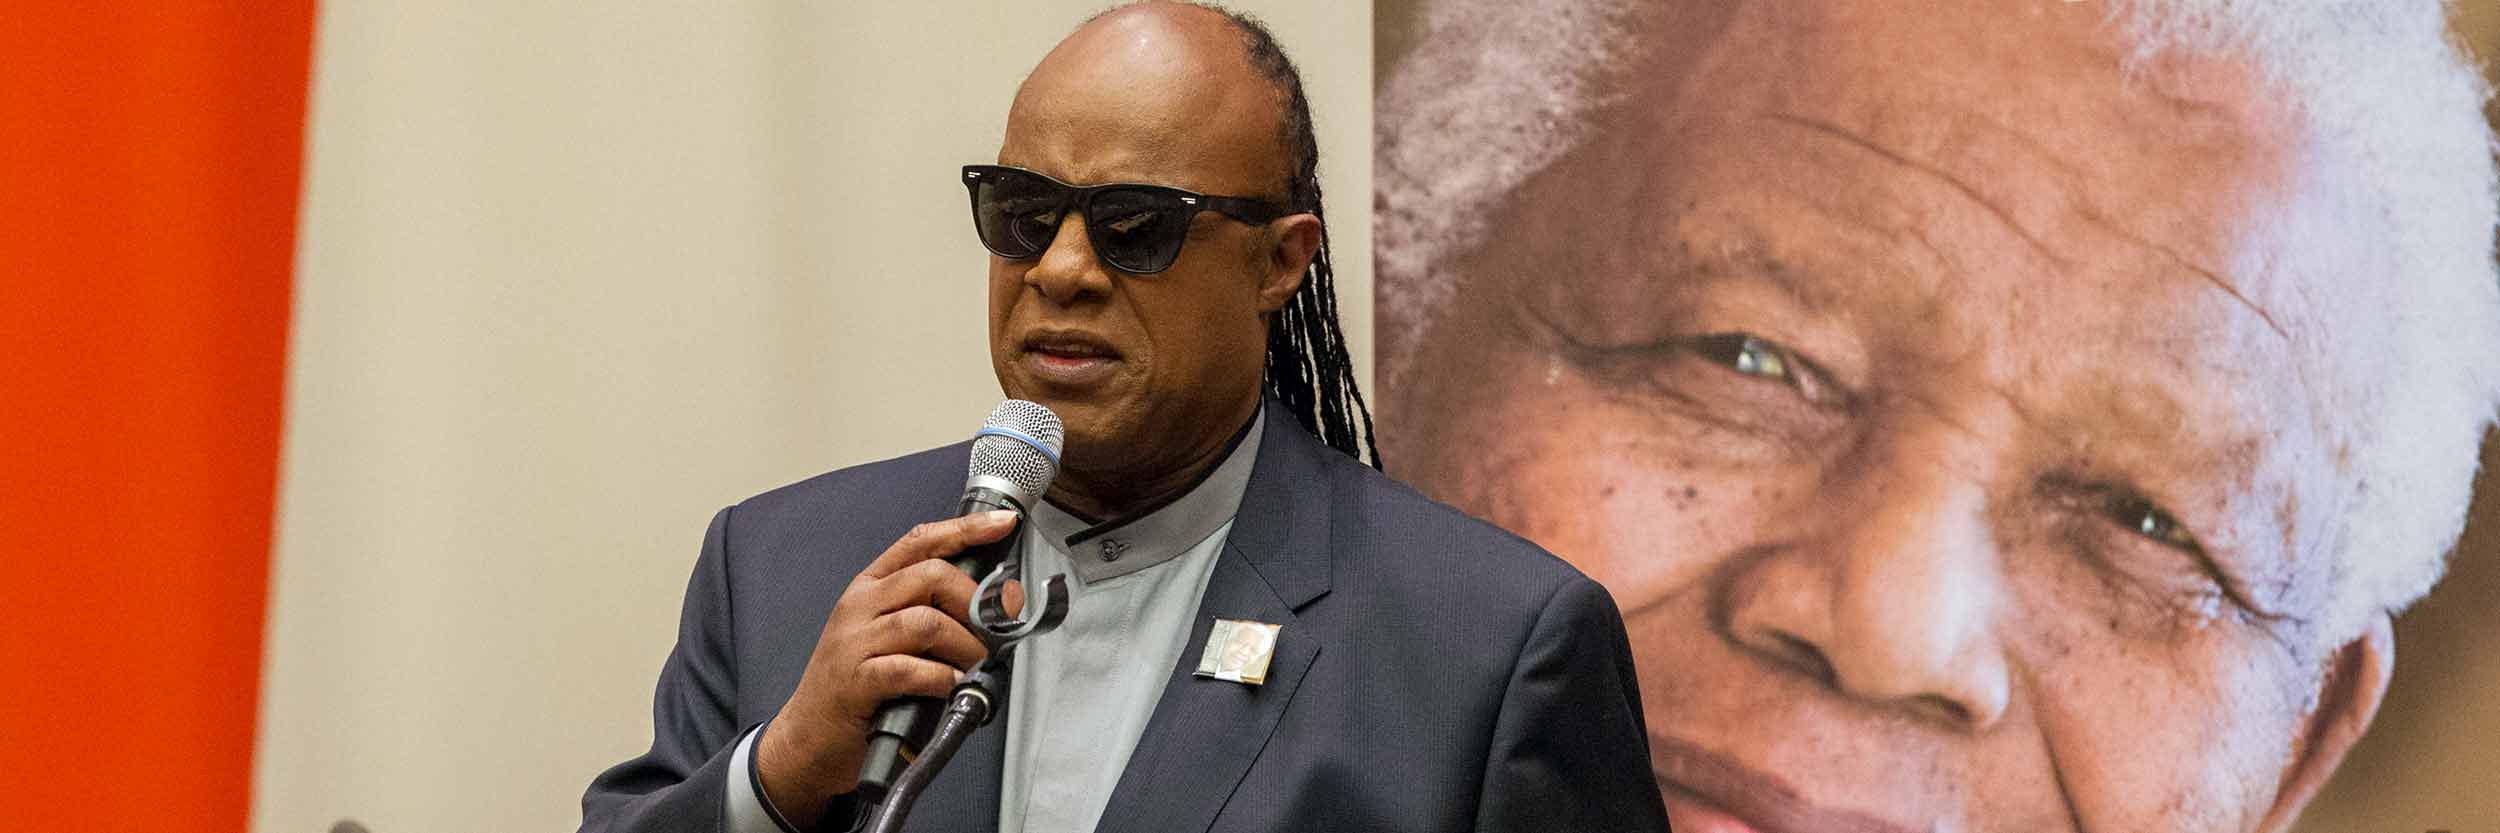 Singer, song writer and UN Messenger of Peace Stevie Wonder, duirng the General Assembly’s informal meeting in observance of Nelson Mandela International Day. UN Photo/JC McIlwaine